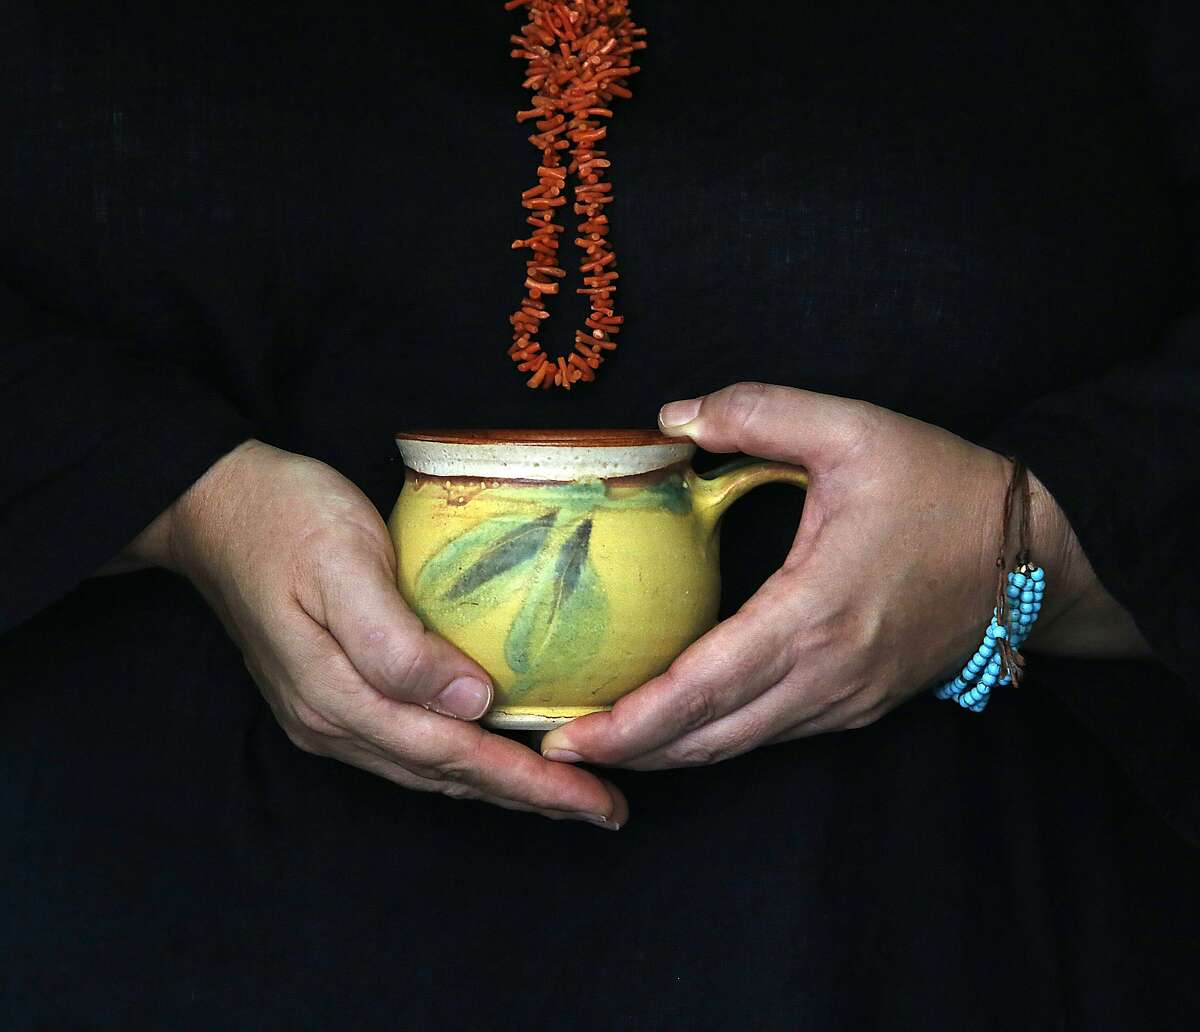 Writer Dana Velden has a new book a "Finding Yourself in the Kitchen" about her Zen practice and her life in the kitchen in Oakland, Calif., on Monday, September 21, 2015. In her book she mentions meditating with a cup of tea and is having PG Tips tea. The coral necklace is her grandmother's.